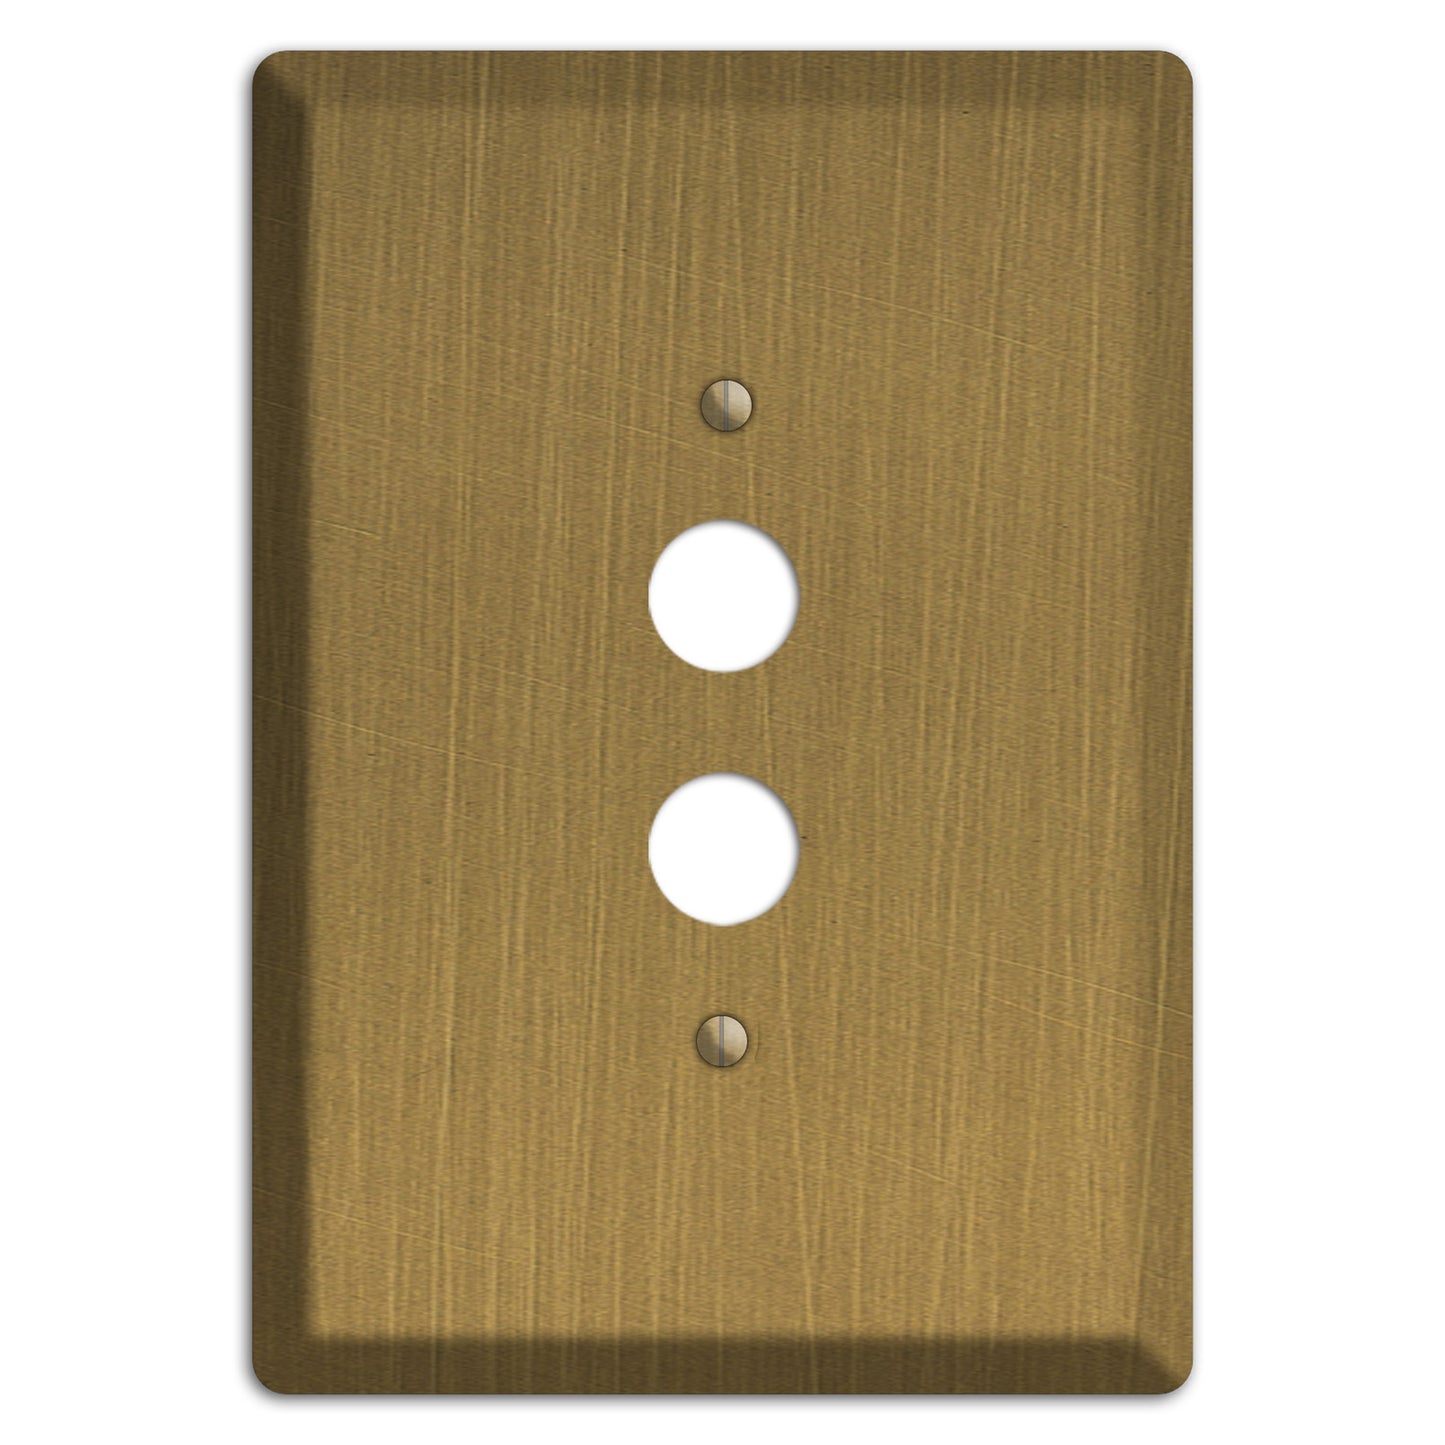 Antique Brushed Solid Brass 1 Pushbutton Wallplate